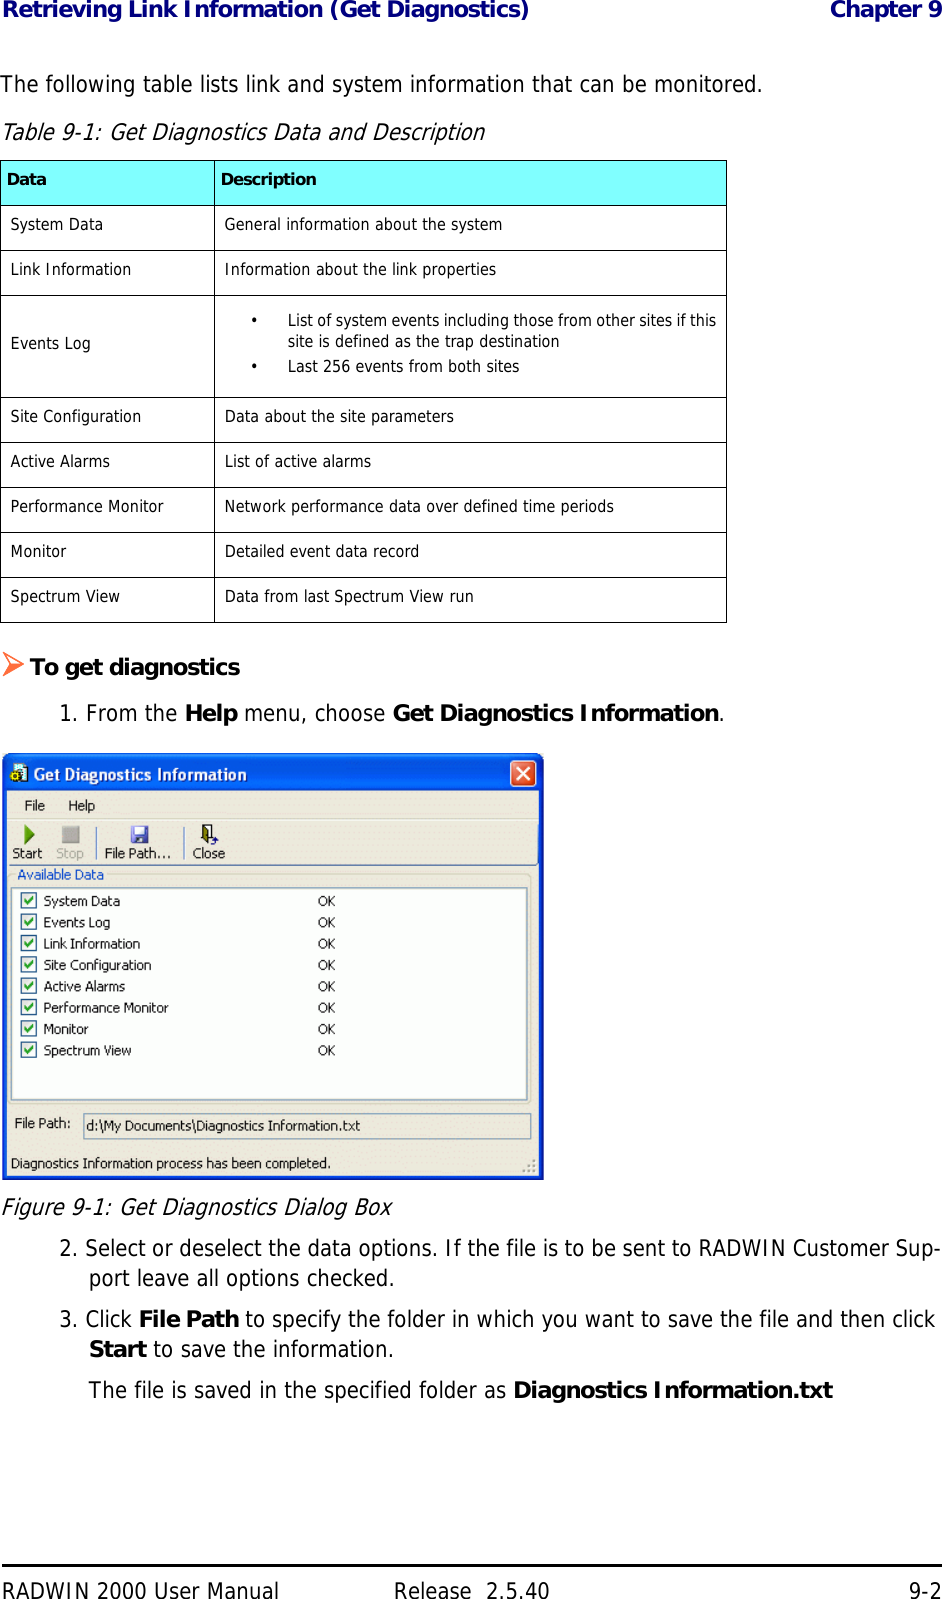 Retrieving Link Information (Get Diagnostics) Chapter 9RADWIN 2000 User Manual Release  2.5.40 9-2The following table lists link and system information that can be monitored.To get diagnostics1. From the Help menu, choose Get Diagnostics Information.Figure 9-1: Get Diagnostics Dialog Box2. Select or deselect the data options. If the file is to be sent to RADWIN Customer Sup-port leave all options checked.3. Click File Path to specify the folder in which you want to save the file and then click Start to save the information.The file is saved in the specified folder as Diagnostics Information.txtTable 9-1: Get Diagnostics Data and DescriptionData DescriptionSystem Data General information about the systemLink Information Information about the link propertiesEvents Log • List of system events including those from other sites if this site is defined as the trap destination• Last 256 events from both sitesSite Configuration Data about the site parametersActive Alarms List of active alarmsPerformance Monitor Network performance data over defined time periodsMonitor Detailed event data recordSpectrum View Data from last Spectrum View run